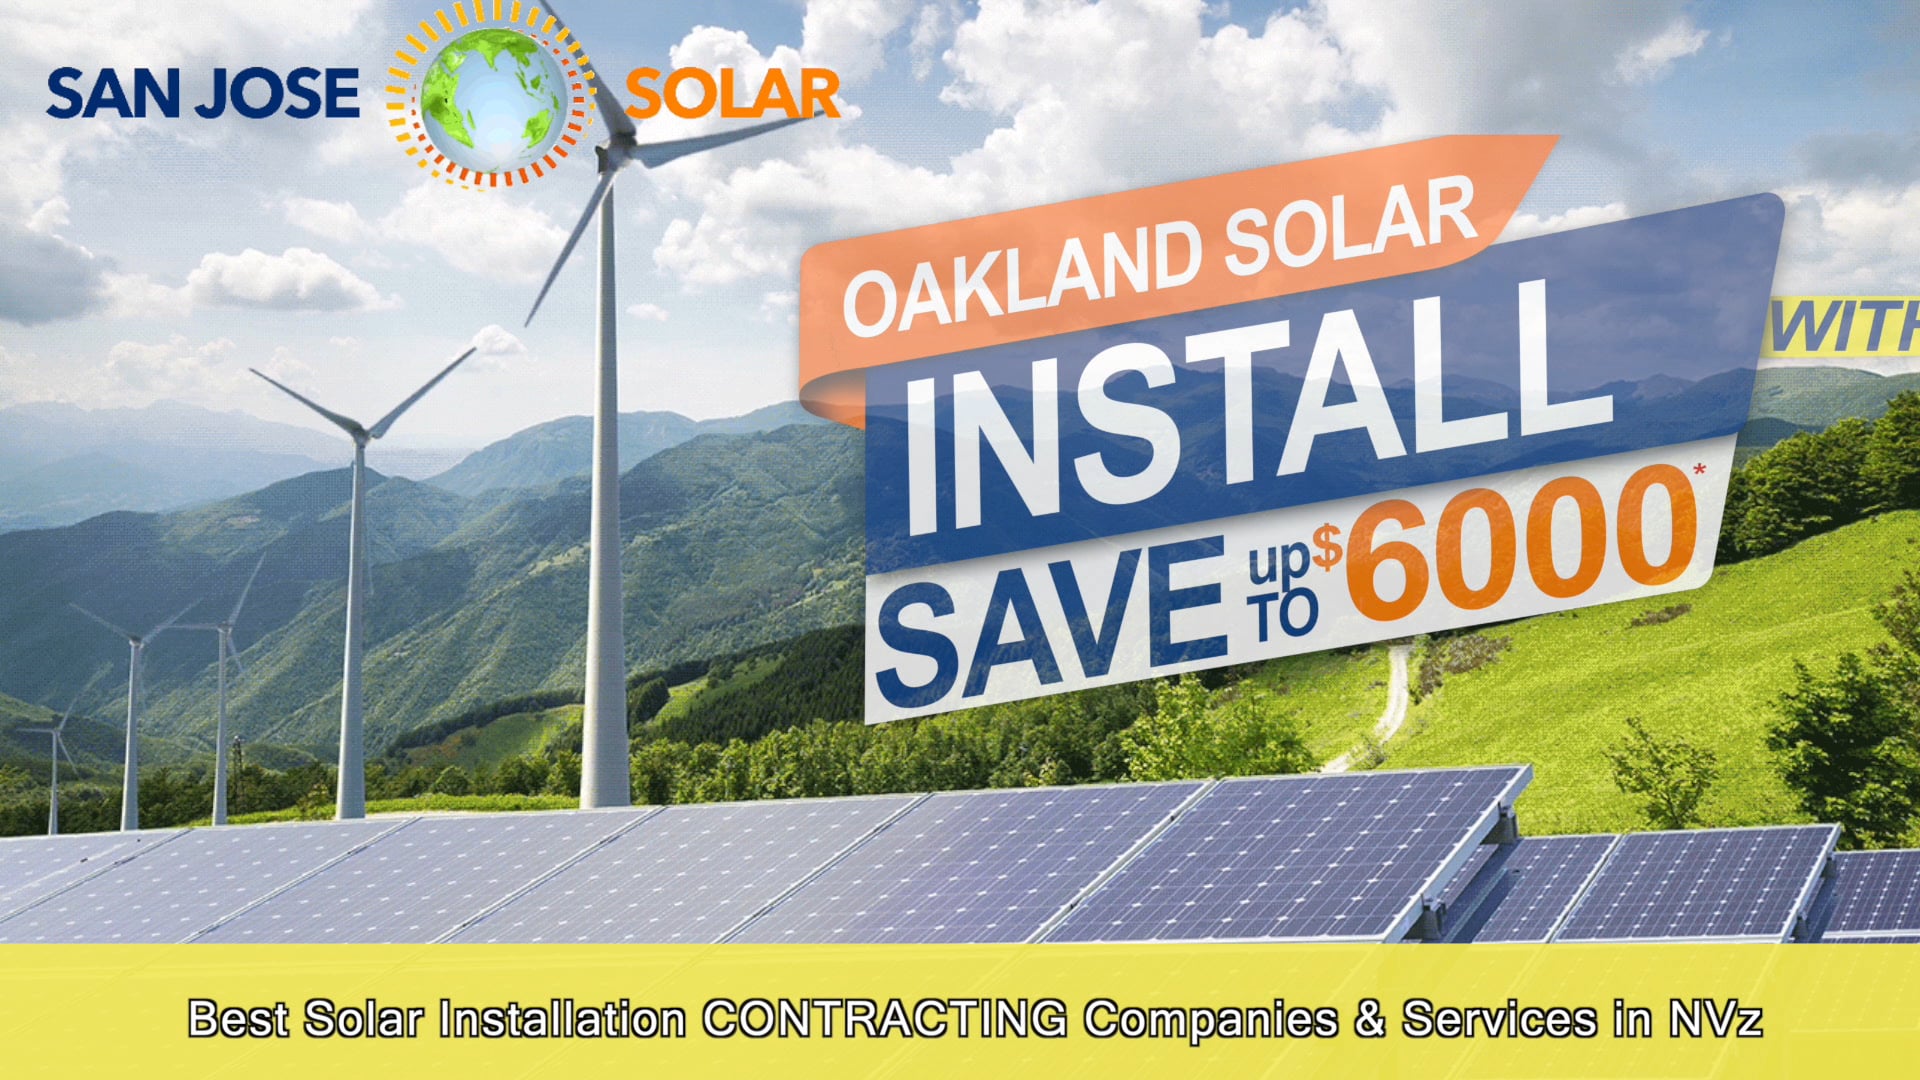 Best Solar Installation CONTRACTING Companies & Services